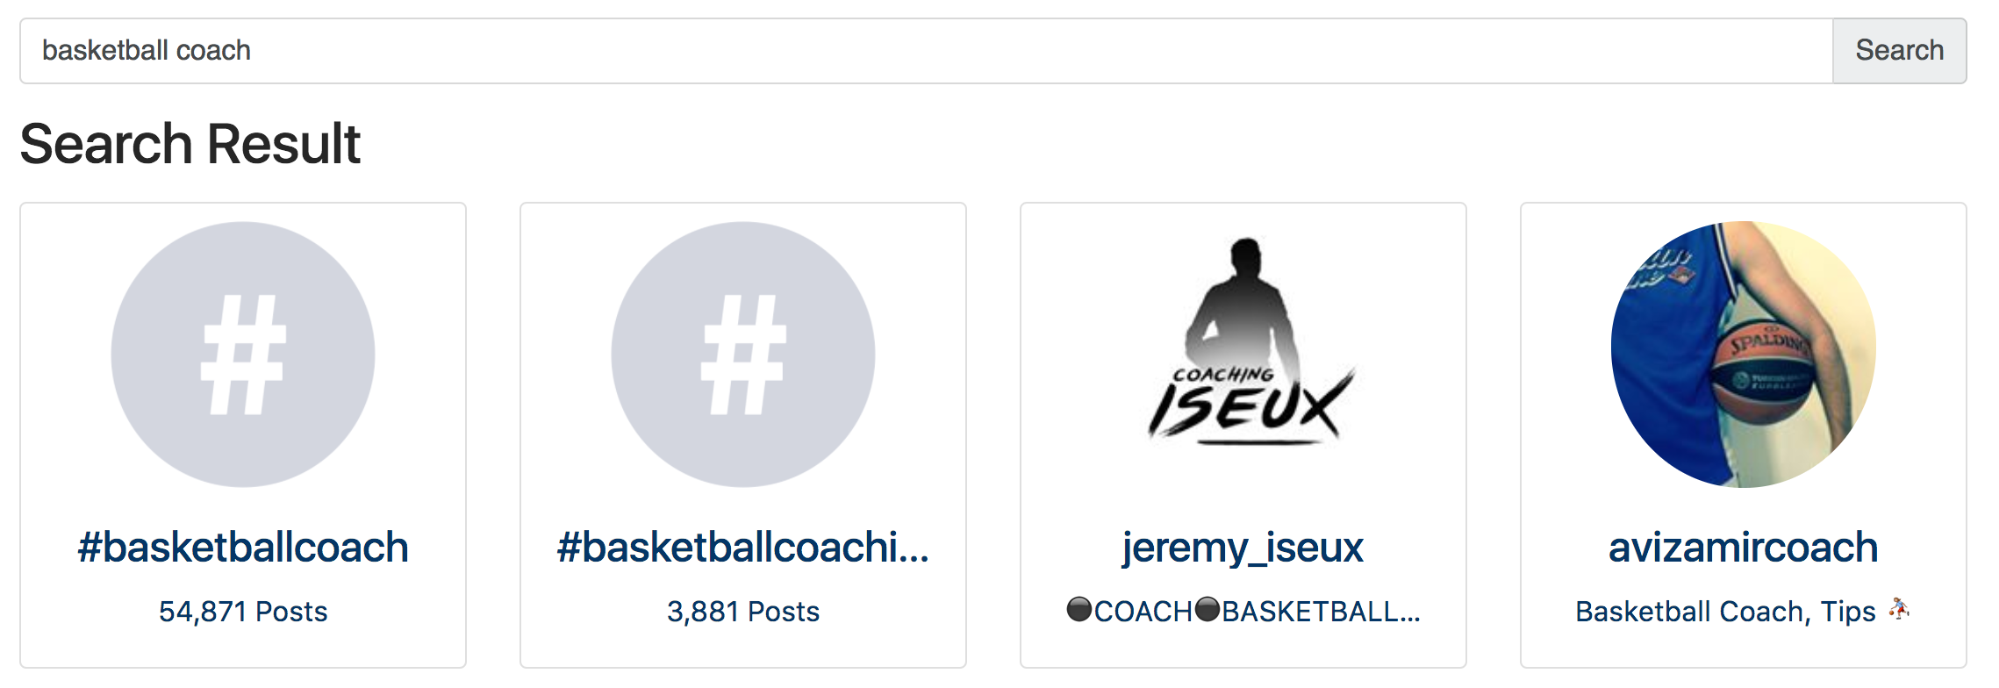 Screenshot showing search results for basketball coach